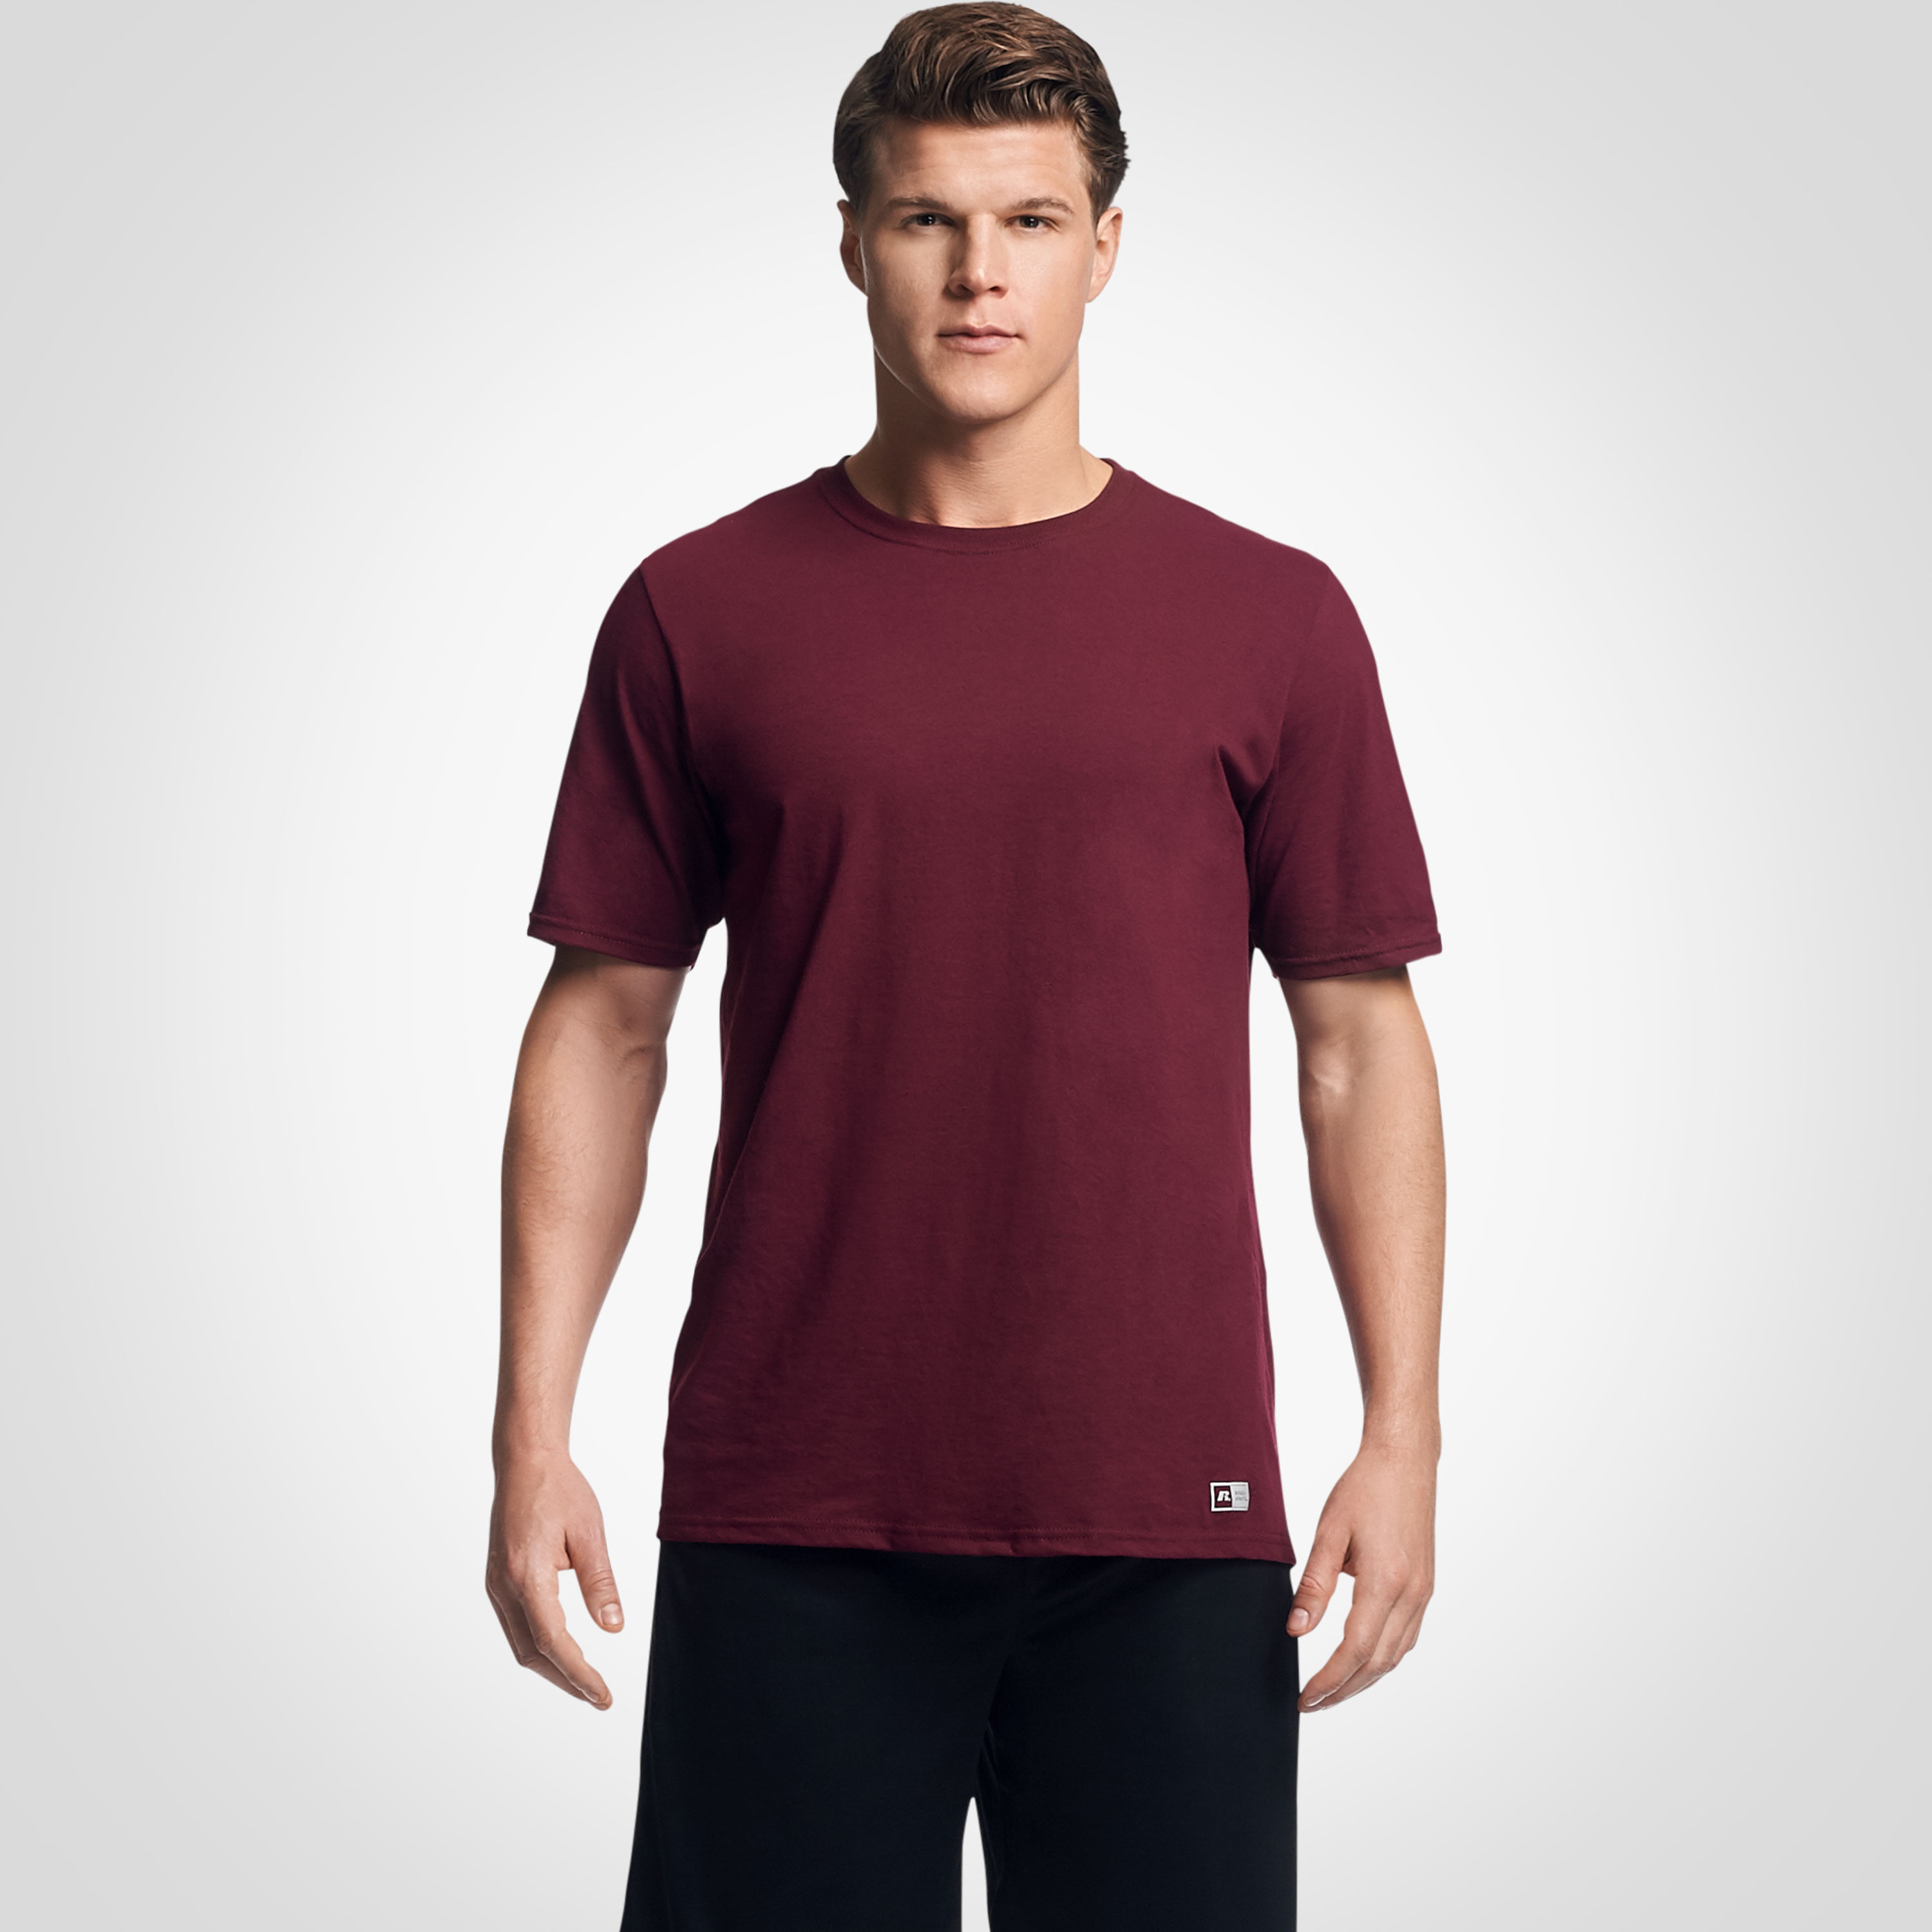 Russell Athletic Shirts Hotsell, 59% OFF | www.alforja.cat